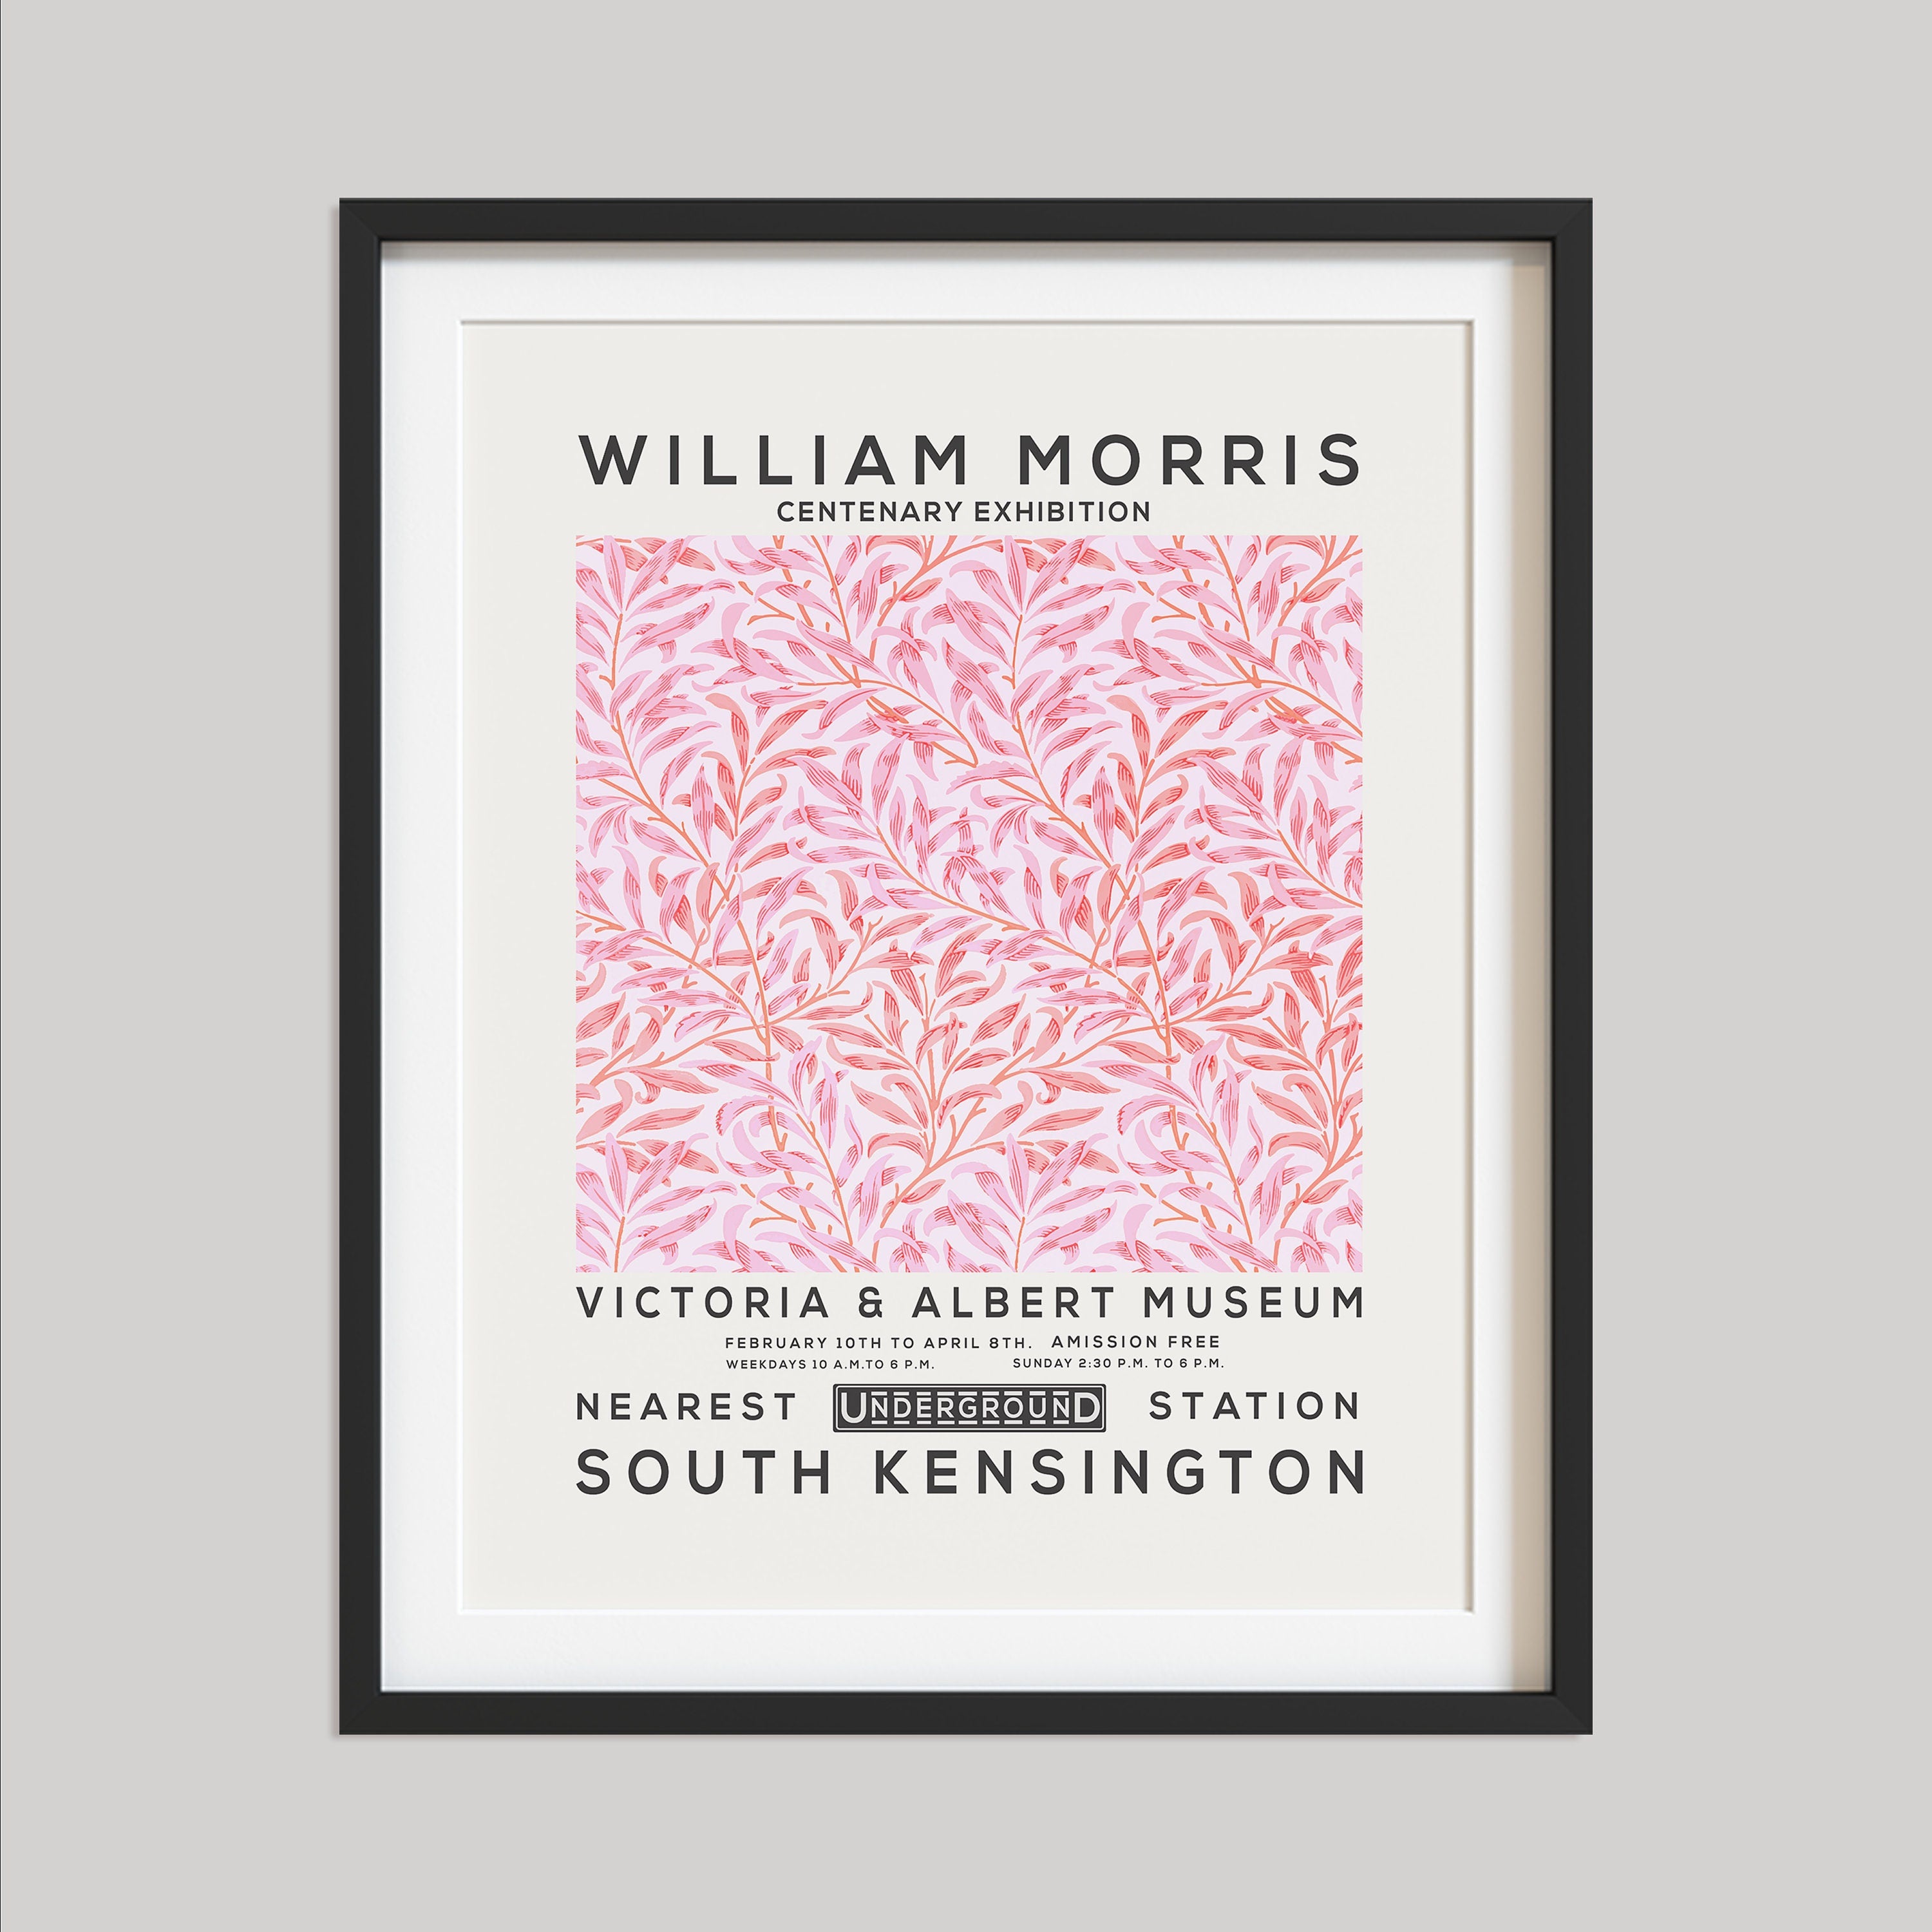 William Morris Print, Vintage Wall Decor, Exhibition Poster, Floral Wall Art, Flower Print, Pink Willow